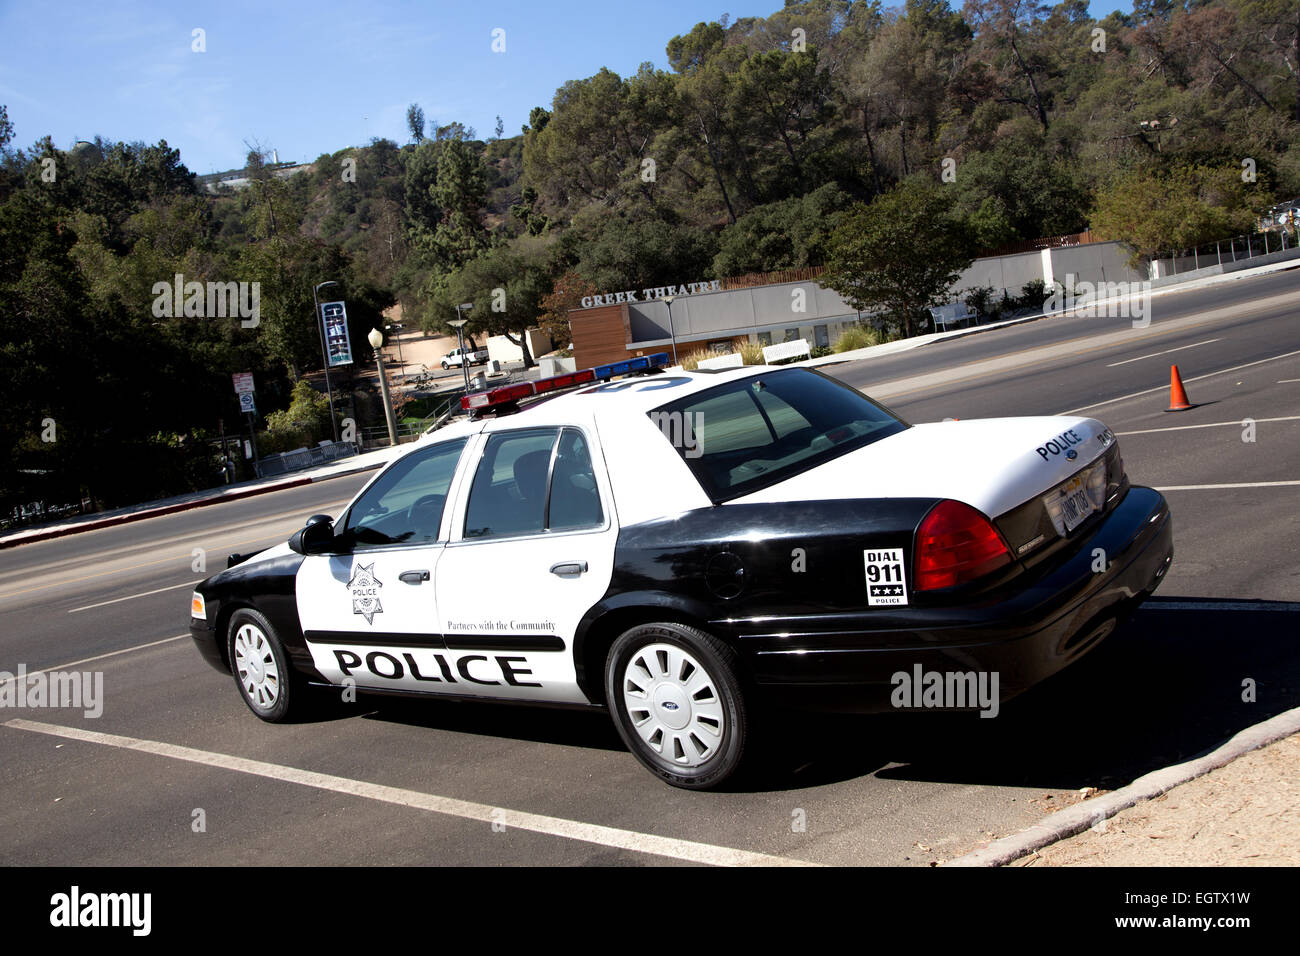 LAPD car parked outside the Greek Theatre in Griffith Park, Los Angeles Stock Photo